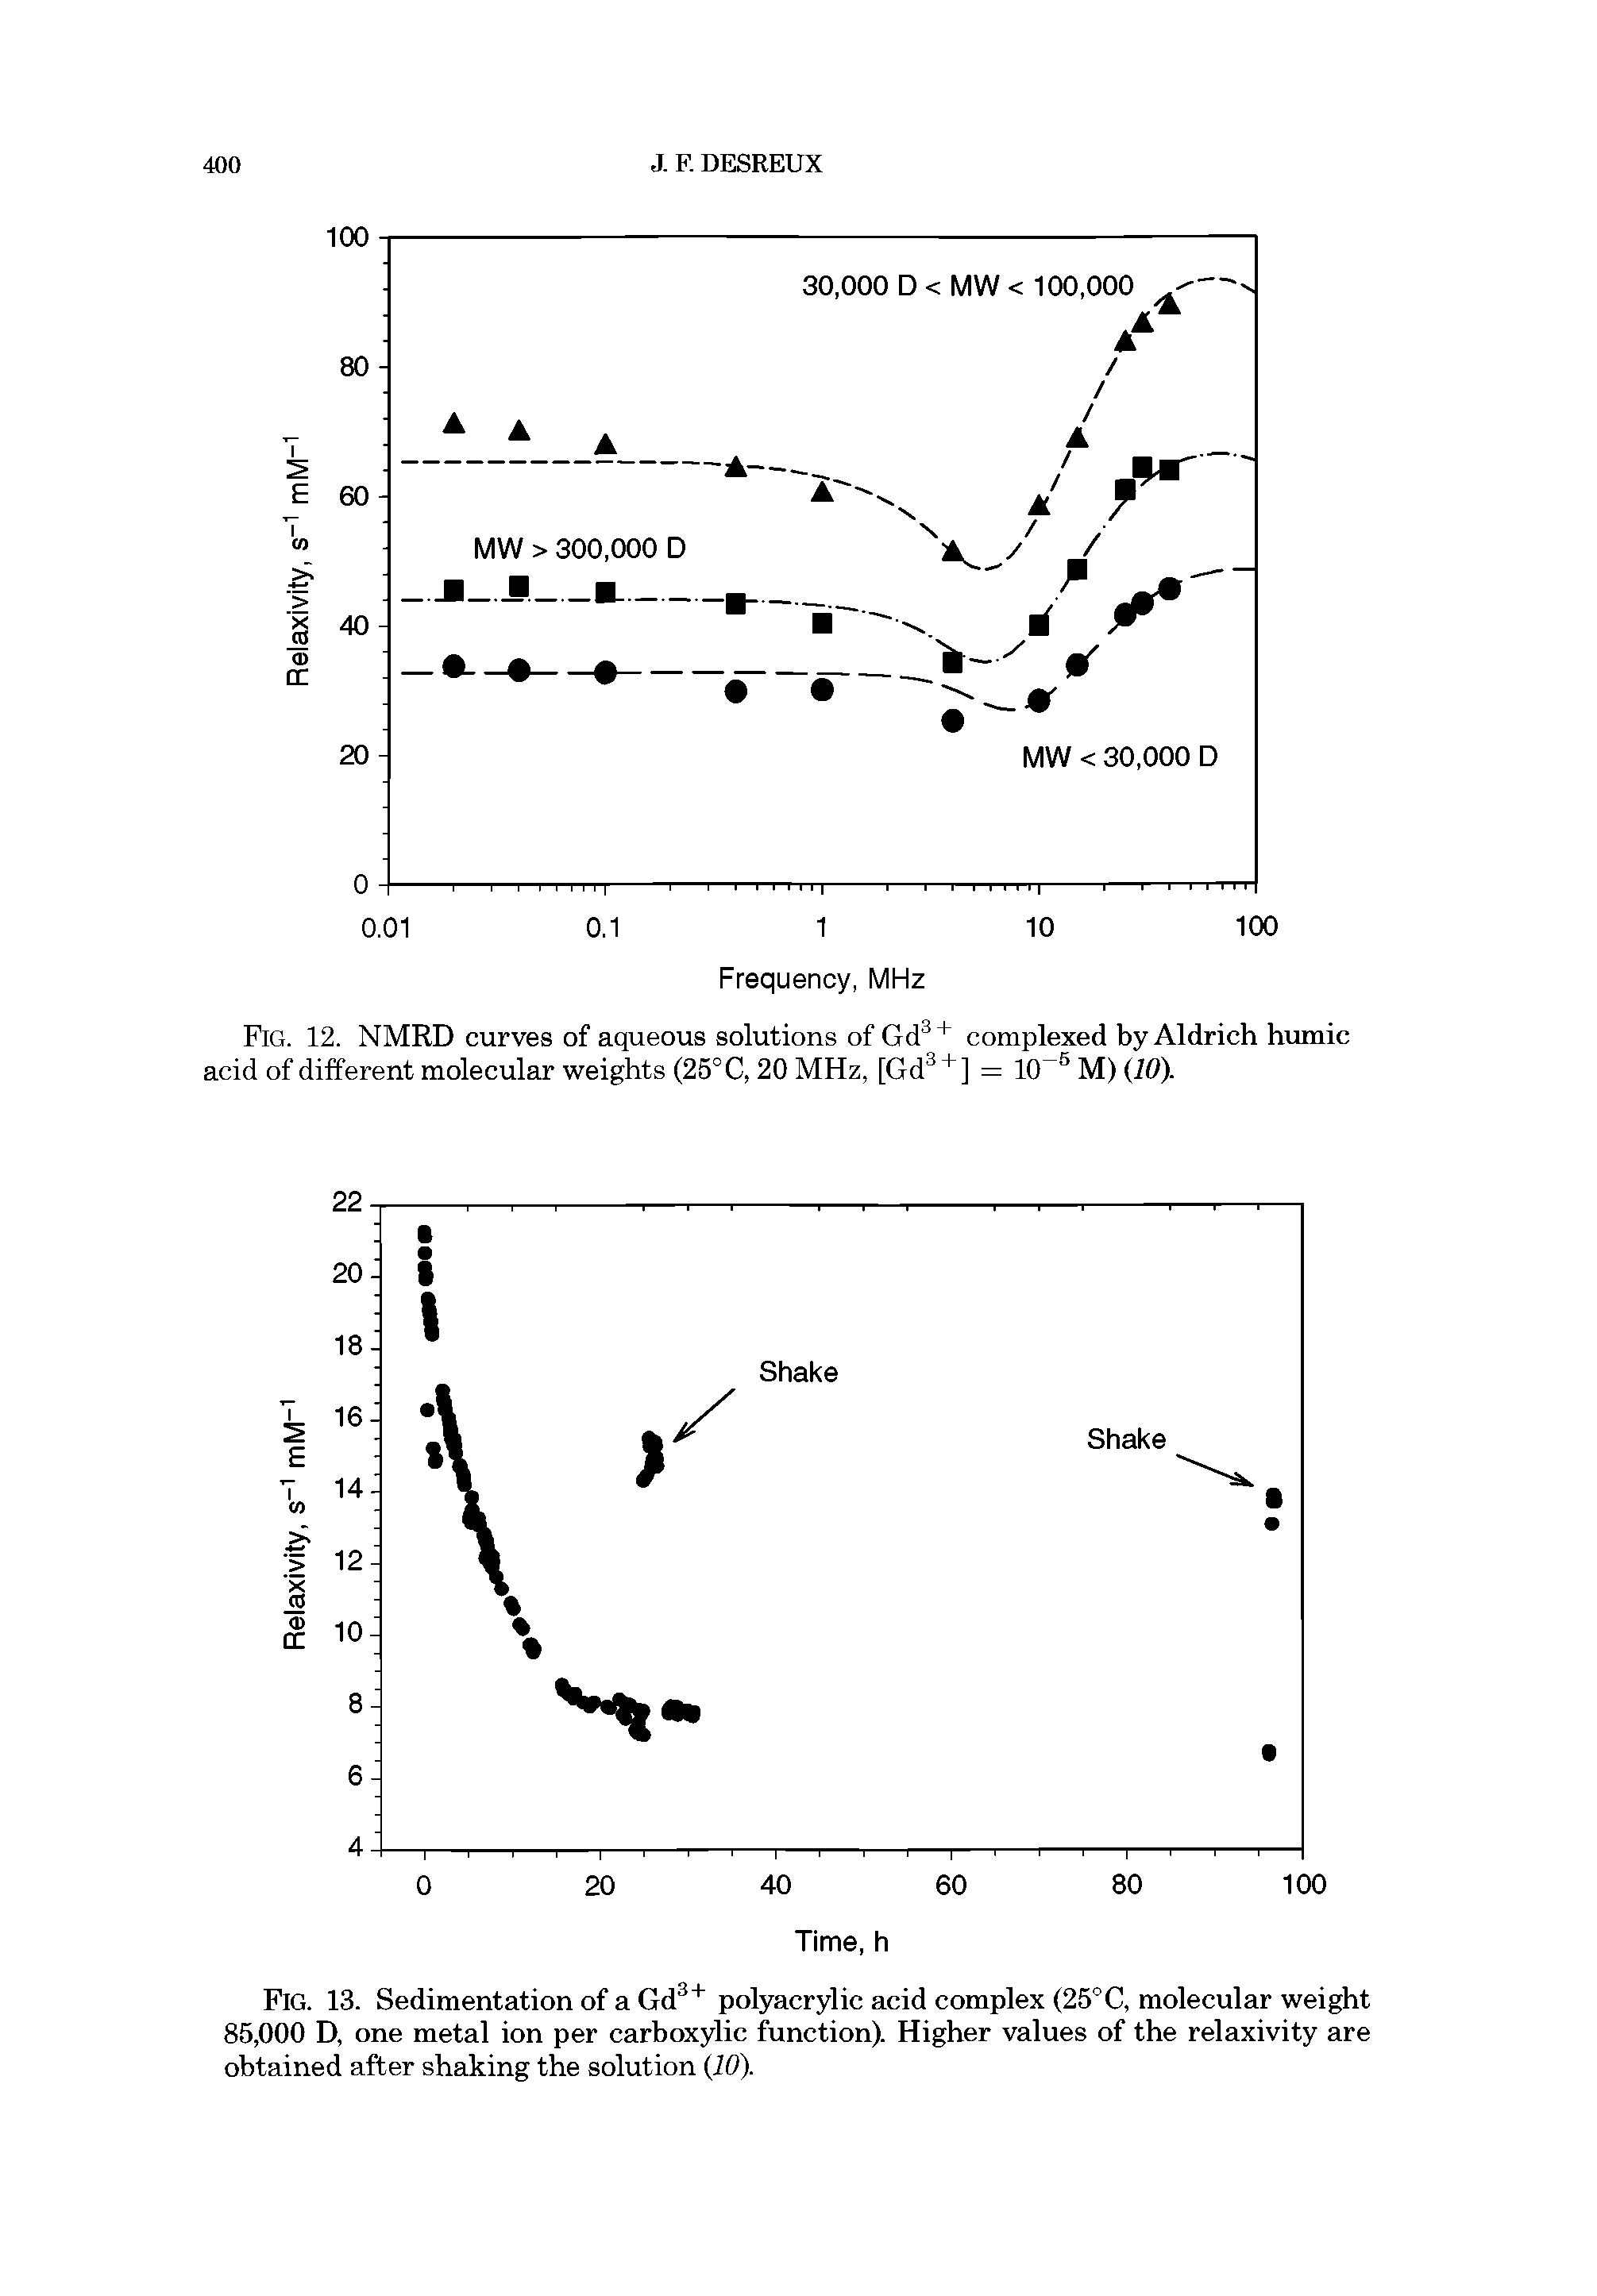 Fig. 13. Sedimentation of a Gd polyacrylic acid complex (25°C, molecular weight 85,000 D, one metal ion per carboxylic function). Higher values of the relaxivity are obtained after shaking the solution 10).